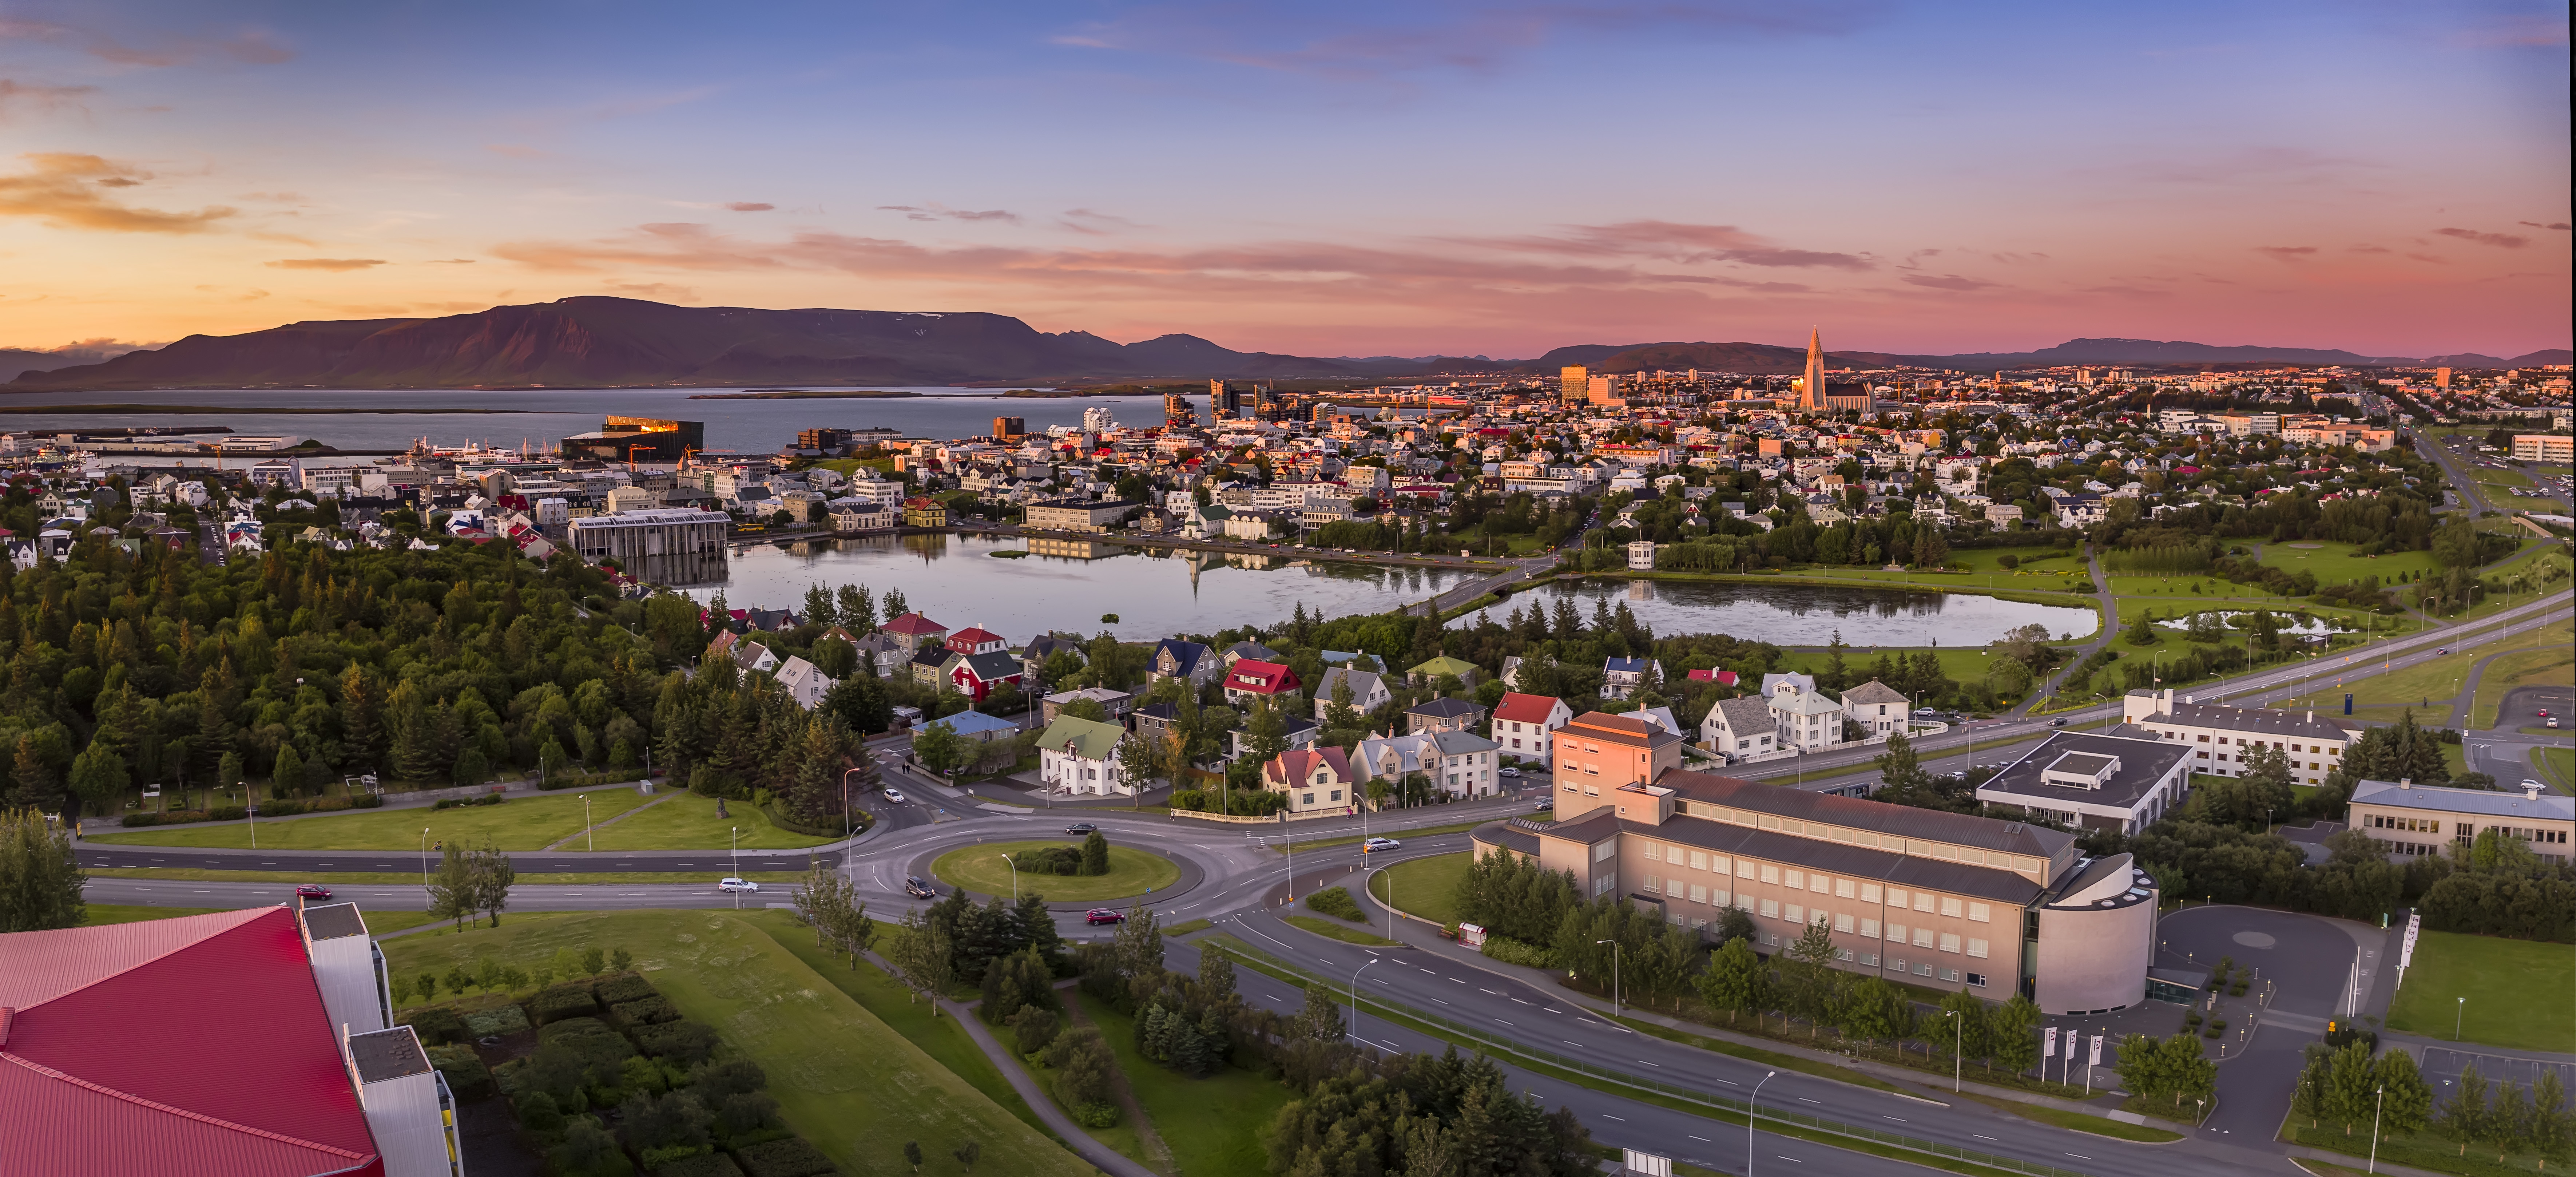 Explore the city of Reykjavík with a 24-Hour City Card.